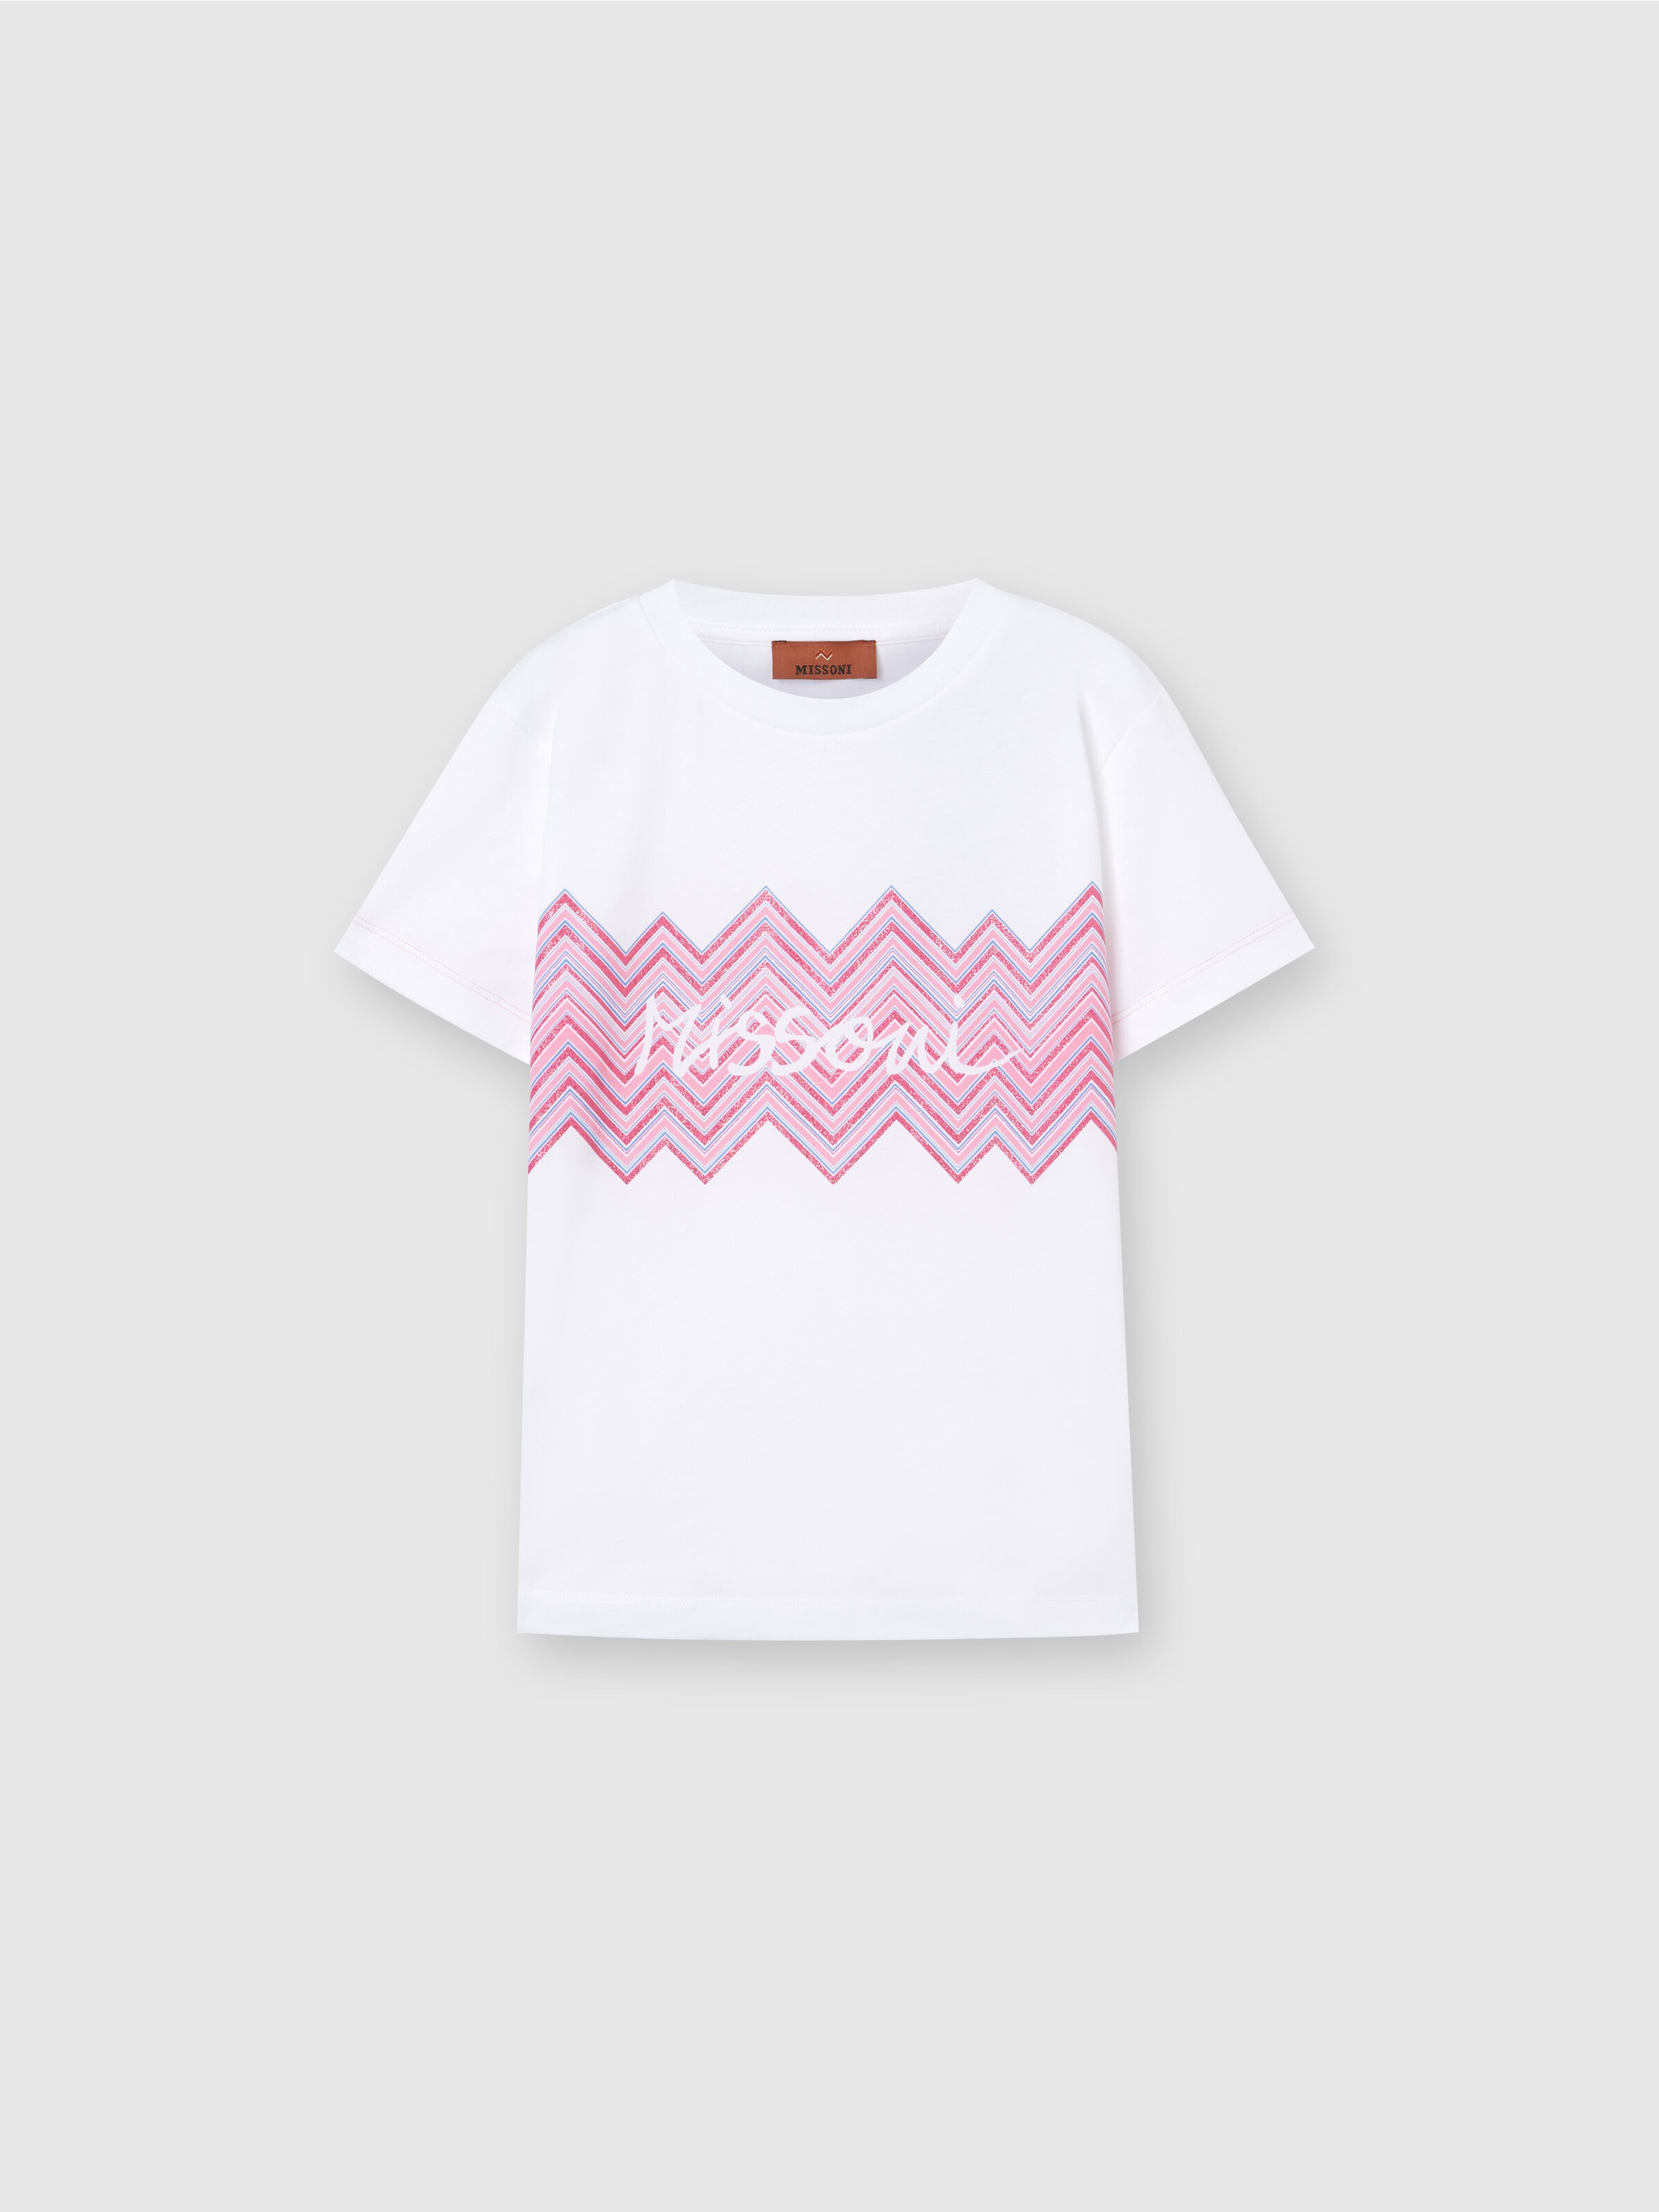 Cotton jersey T-shirt with chevron insert and logo, Multicoloured  - 0